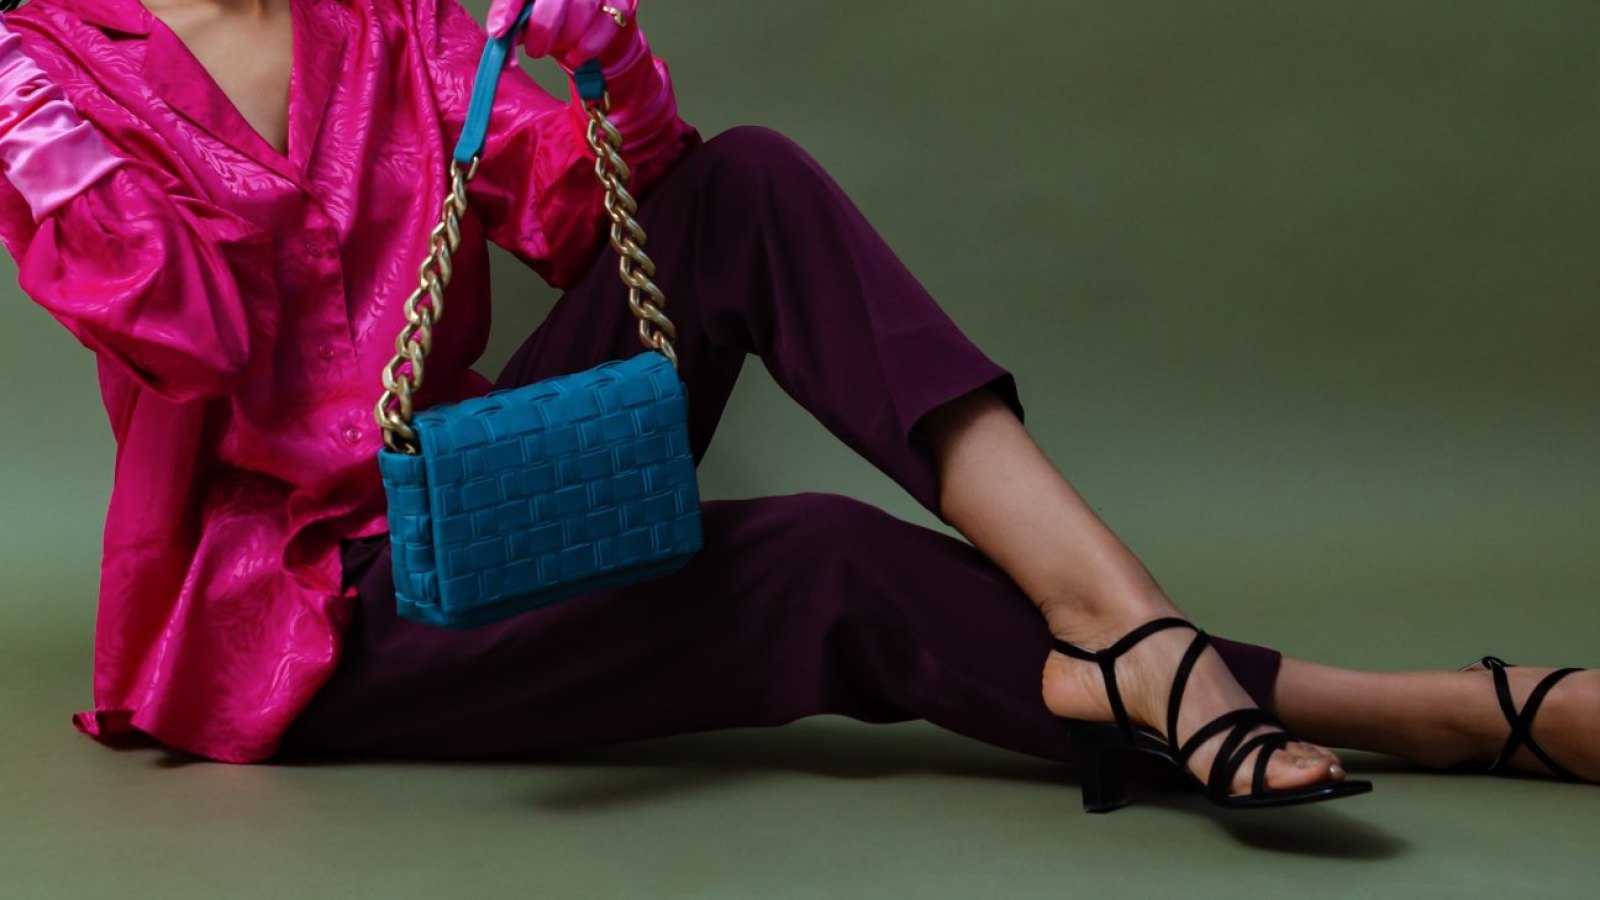 The Mini Bags That Are Making a Major Statement